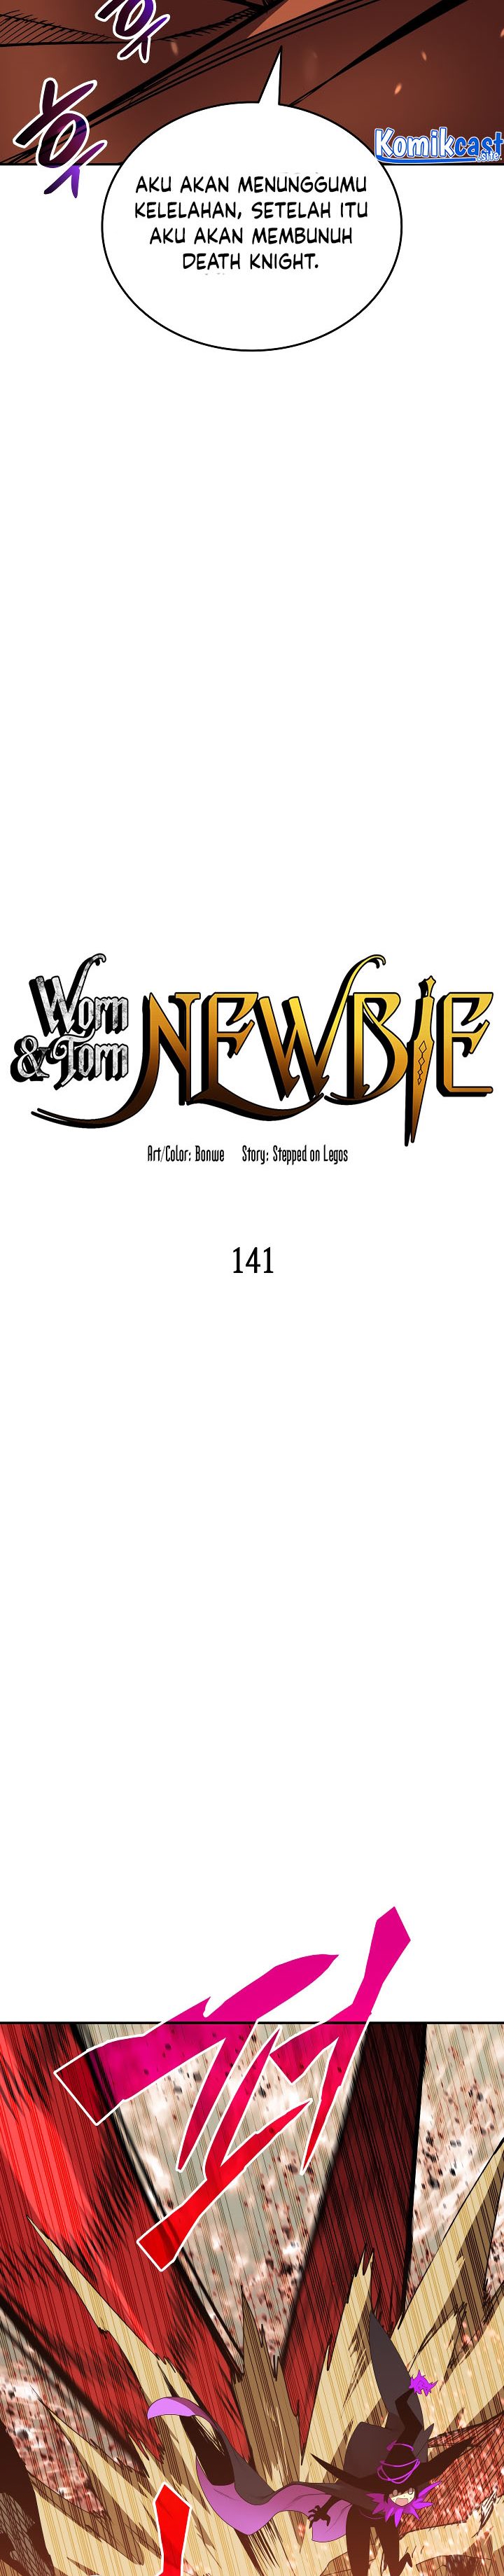 Worn And Torn Newbie Chapter 141